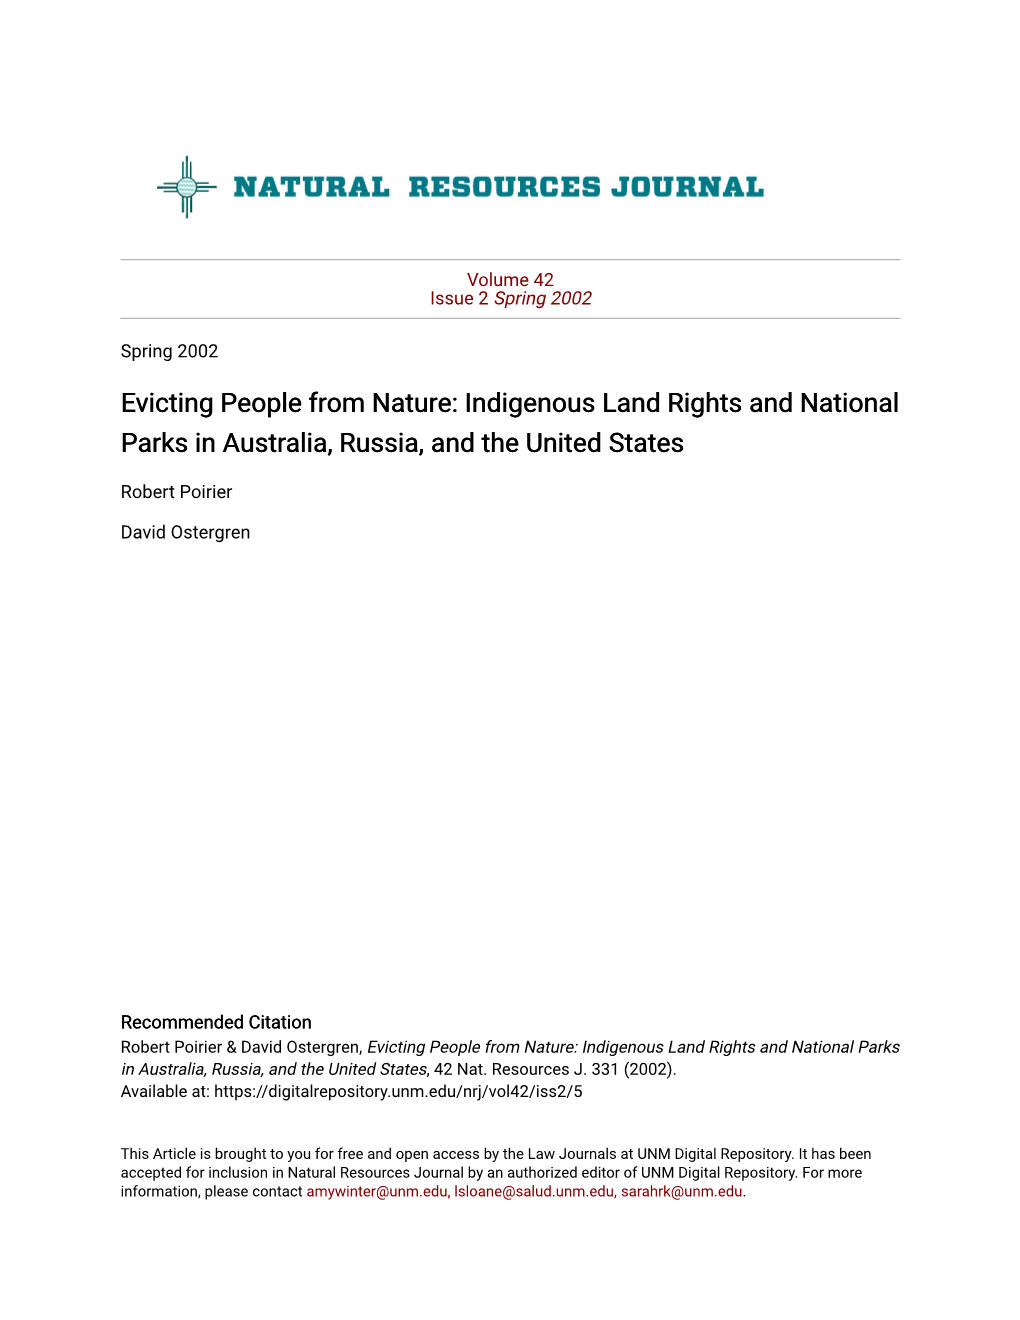 Indigenous Land Rights and National Parks in Australia, Russia, and the United States